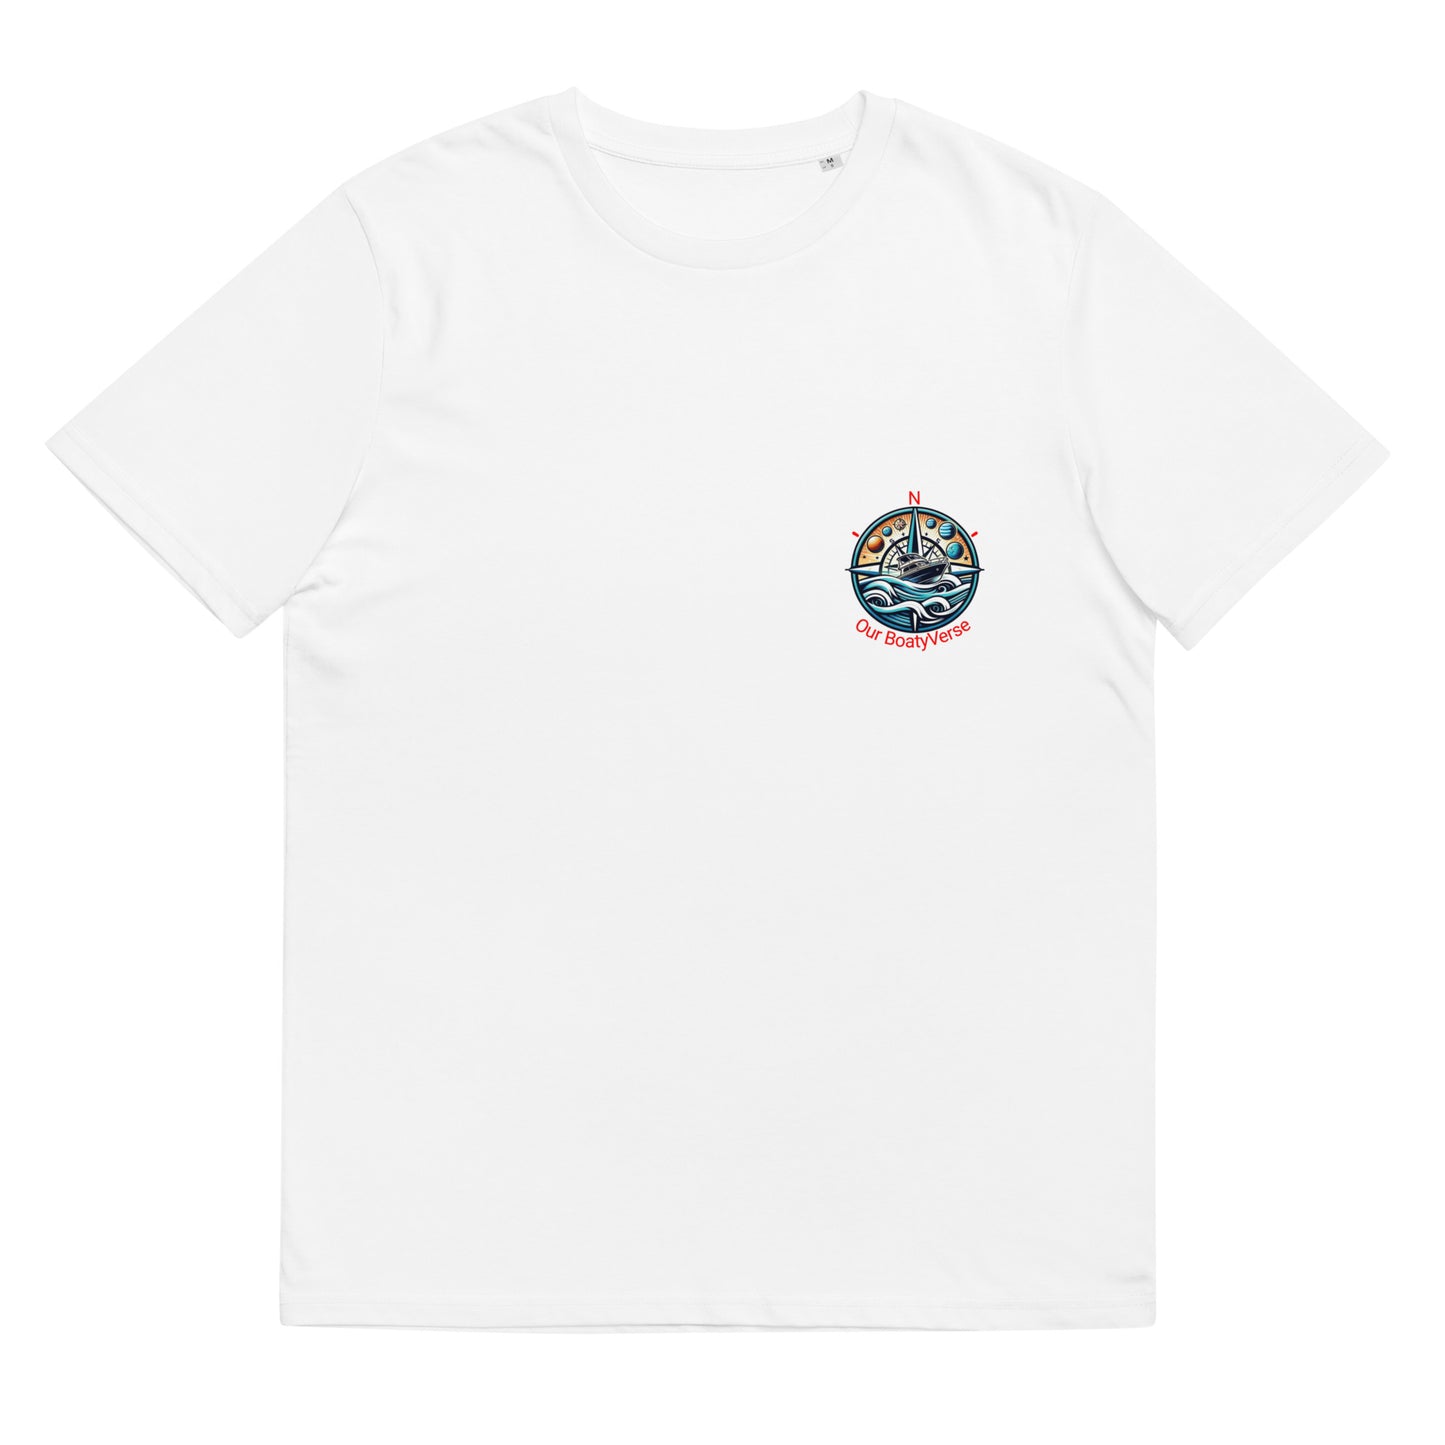 The Compass, 100% organic cotton t-shirt by Our BoatyVerse.